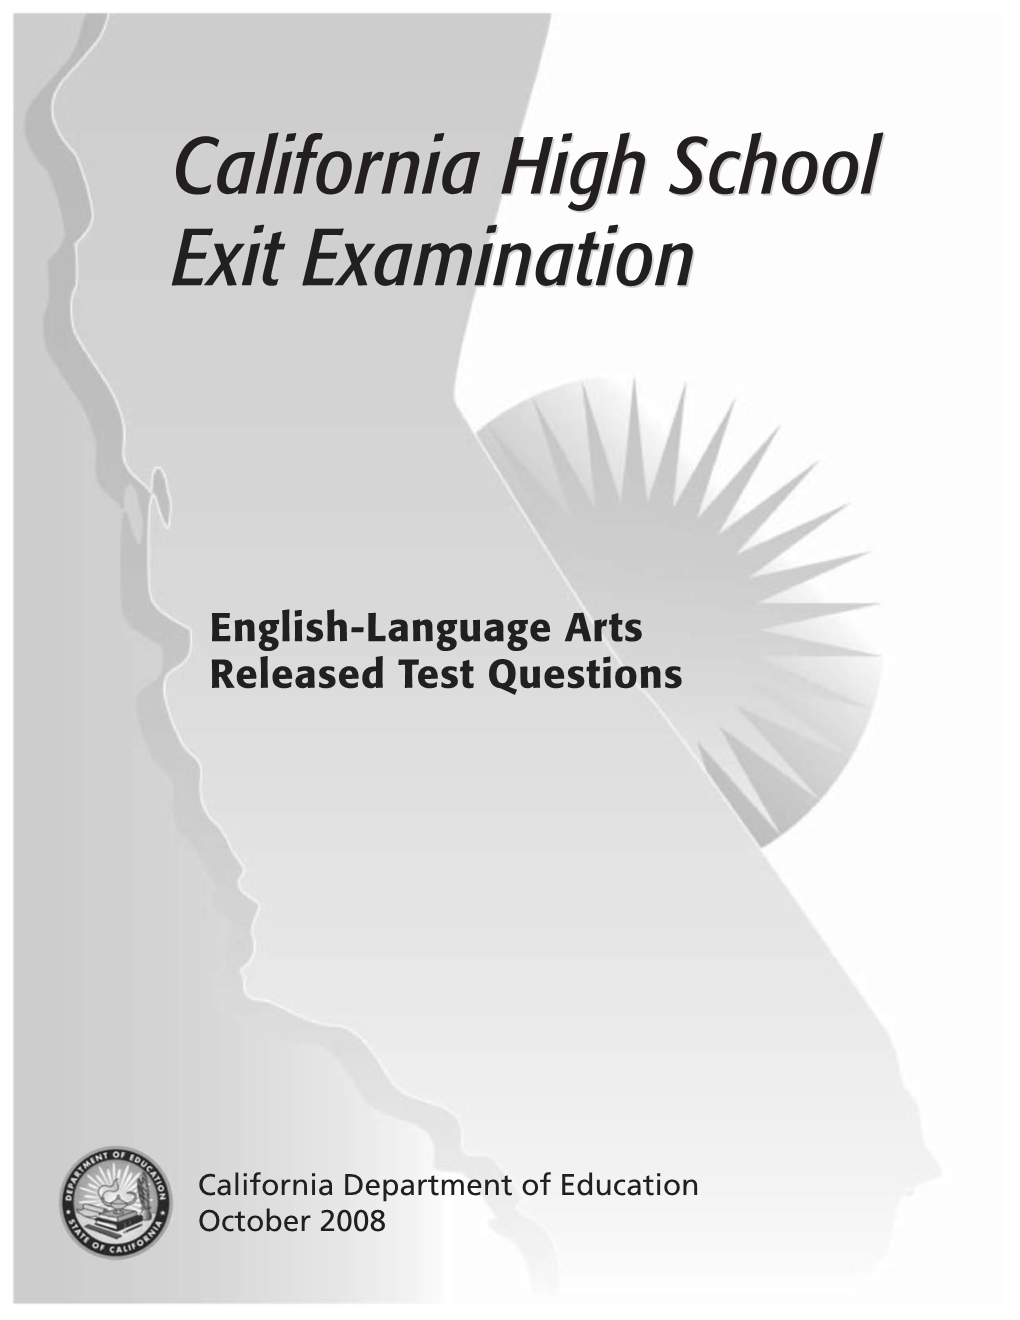 California High School Exit Examination (CAHSEE) Requirement, As Well As All Other State and Local Requirements, in Order to Receive a High School Diploma